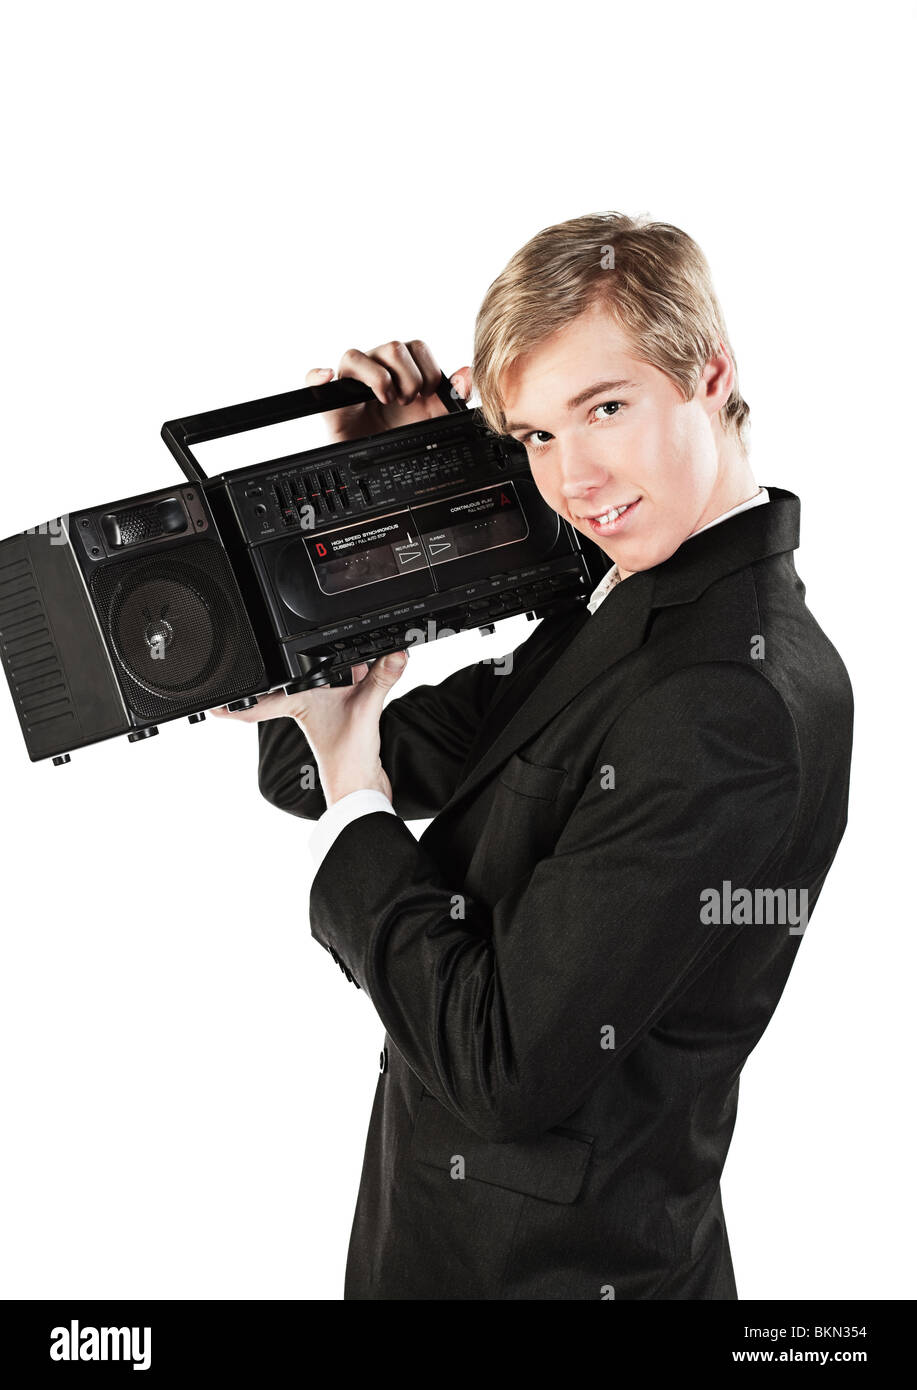 Blond handsome smiling young man holds stereo player in 1980s style Stock Photo